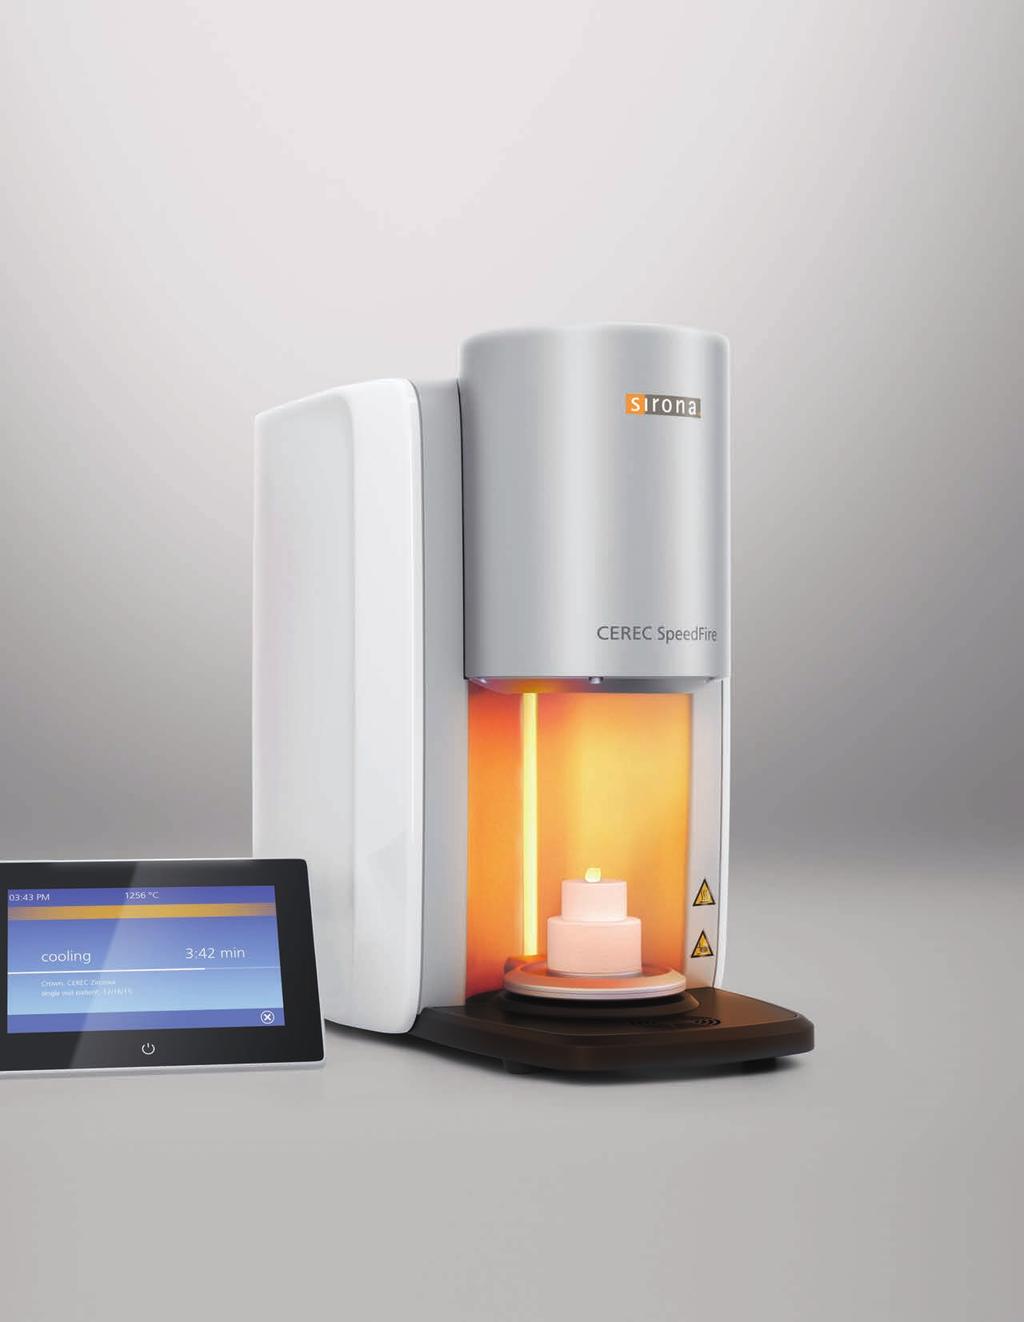 14 I 15 4 Sintering & glazing zirconia with CEREC SpeedFire CEREC SpeedFire is the only dental furnace you need. It can sinter, glaze and cystallize all your materials.